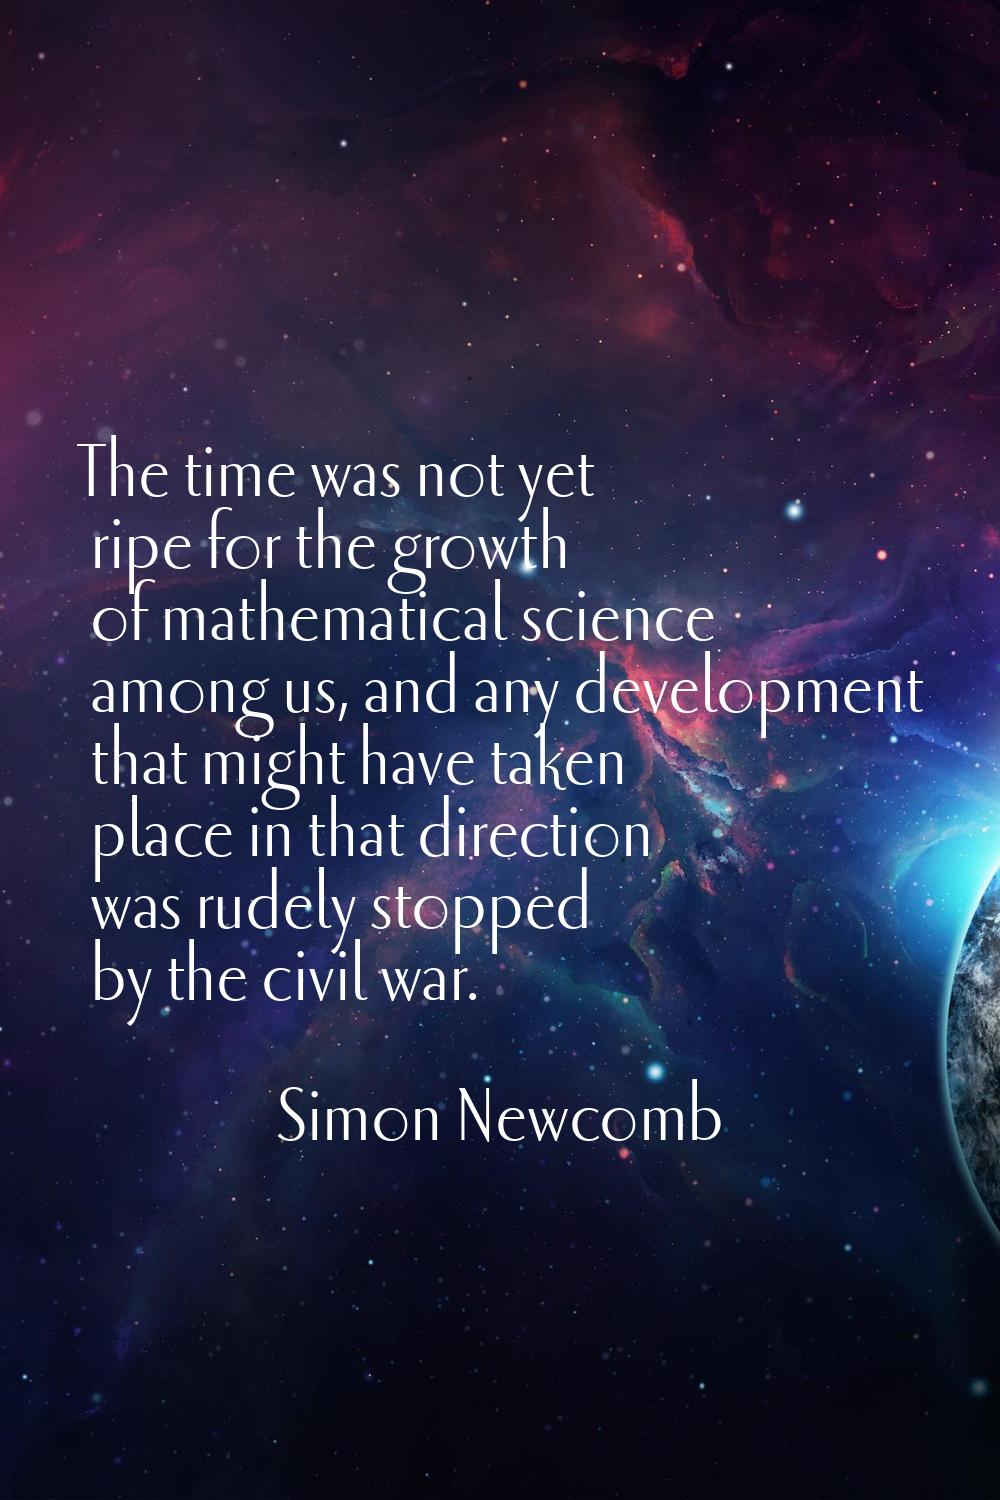 The time was not yet ripe for the growth of mathematical science among us, and any development that